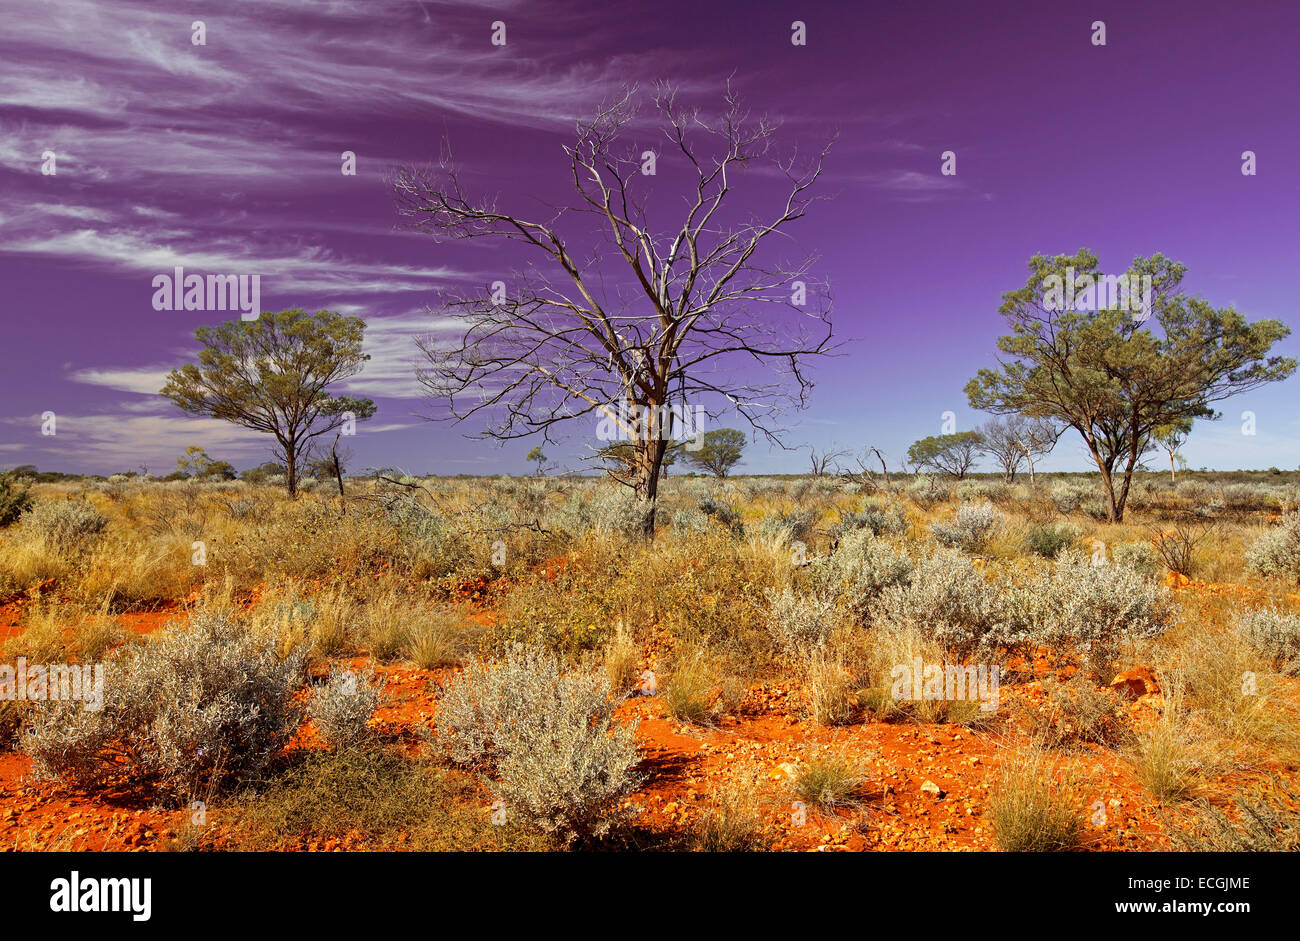 Australian outback landscape with vast red plains to horizon, low bushes,  and dead tree against purple sky streaked with cloud Stock Photo - Alamy